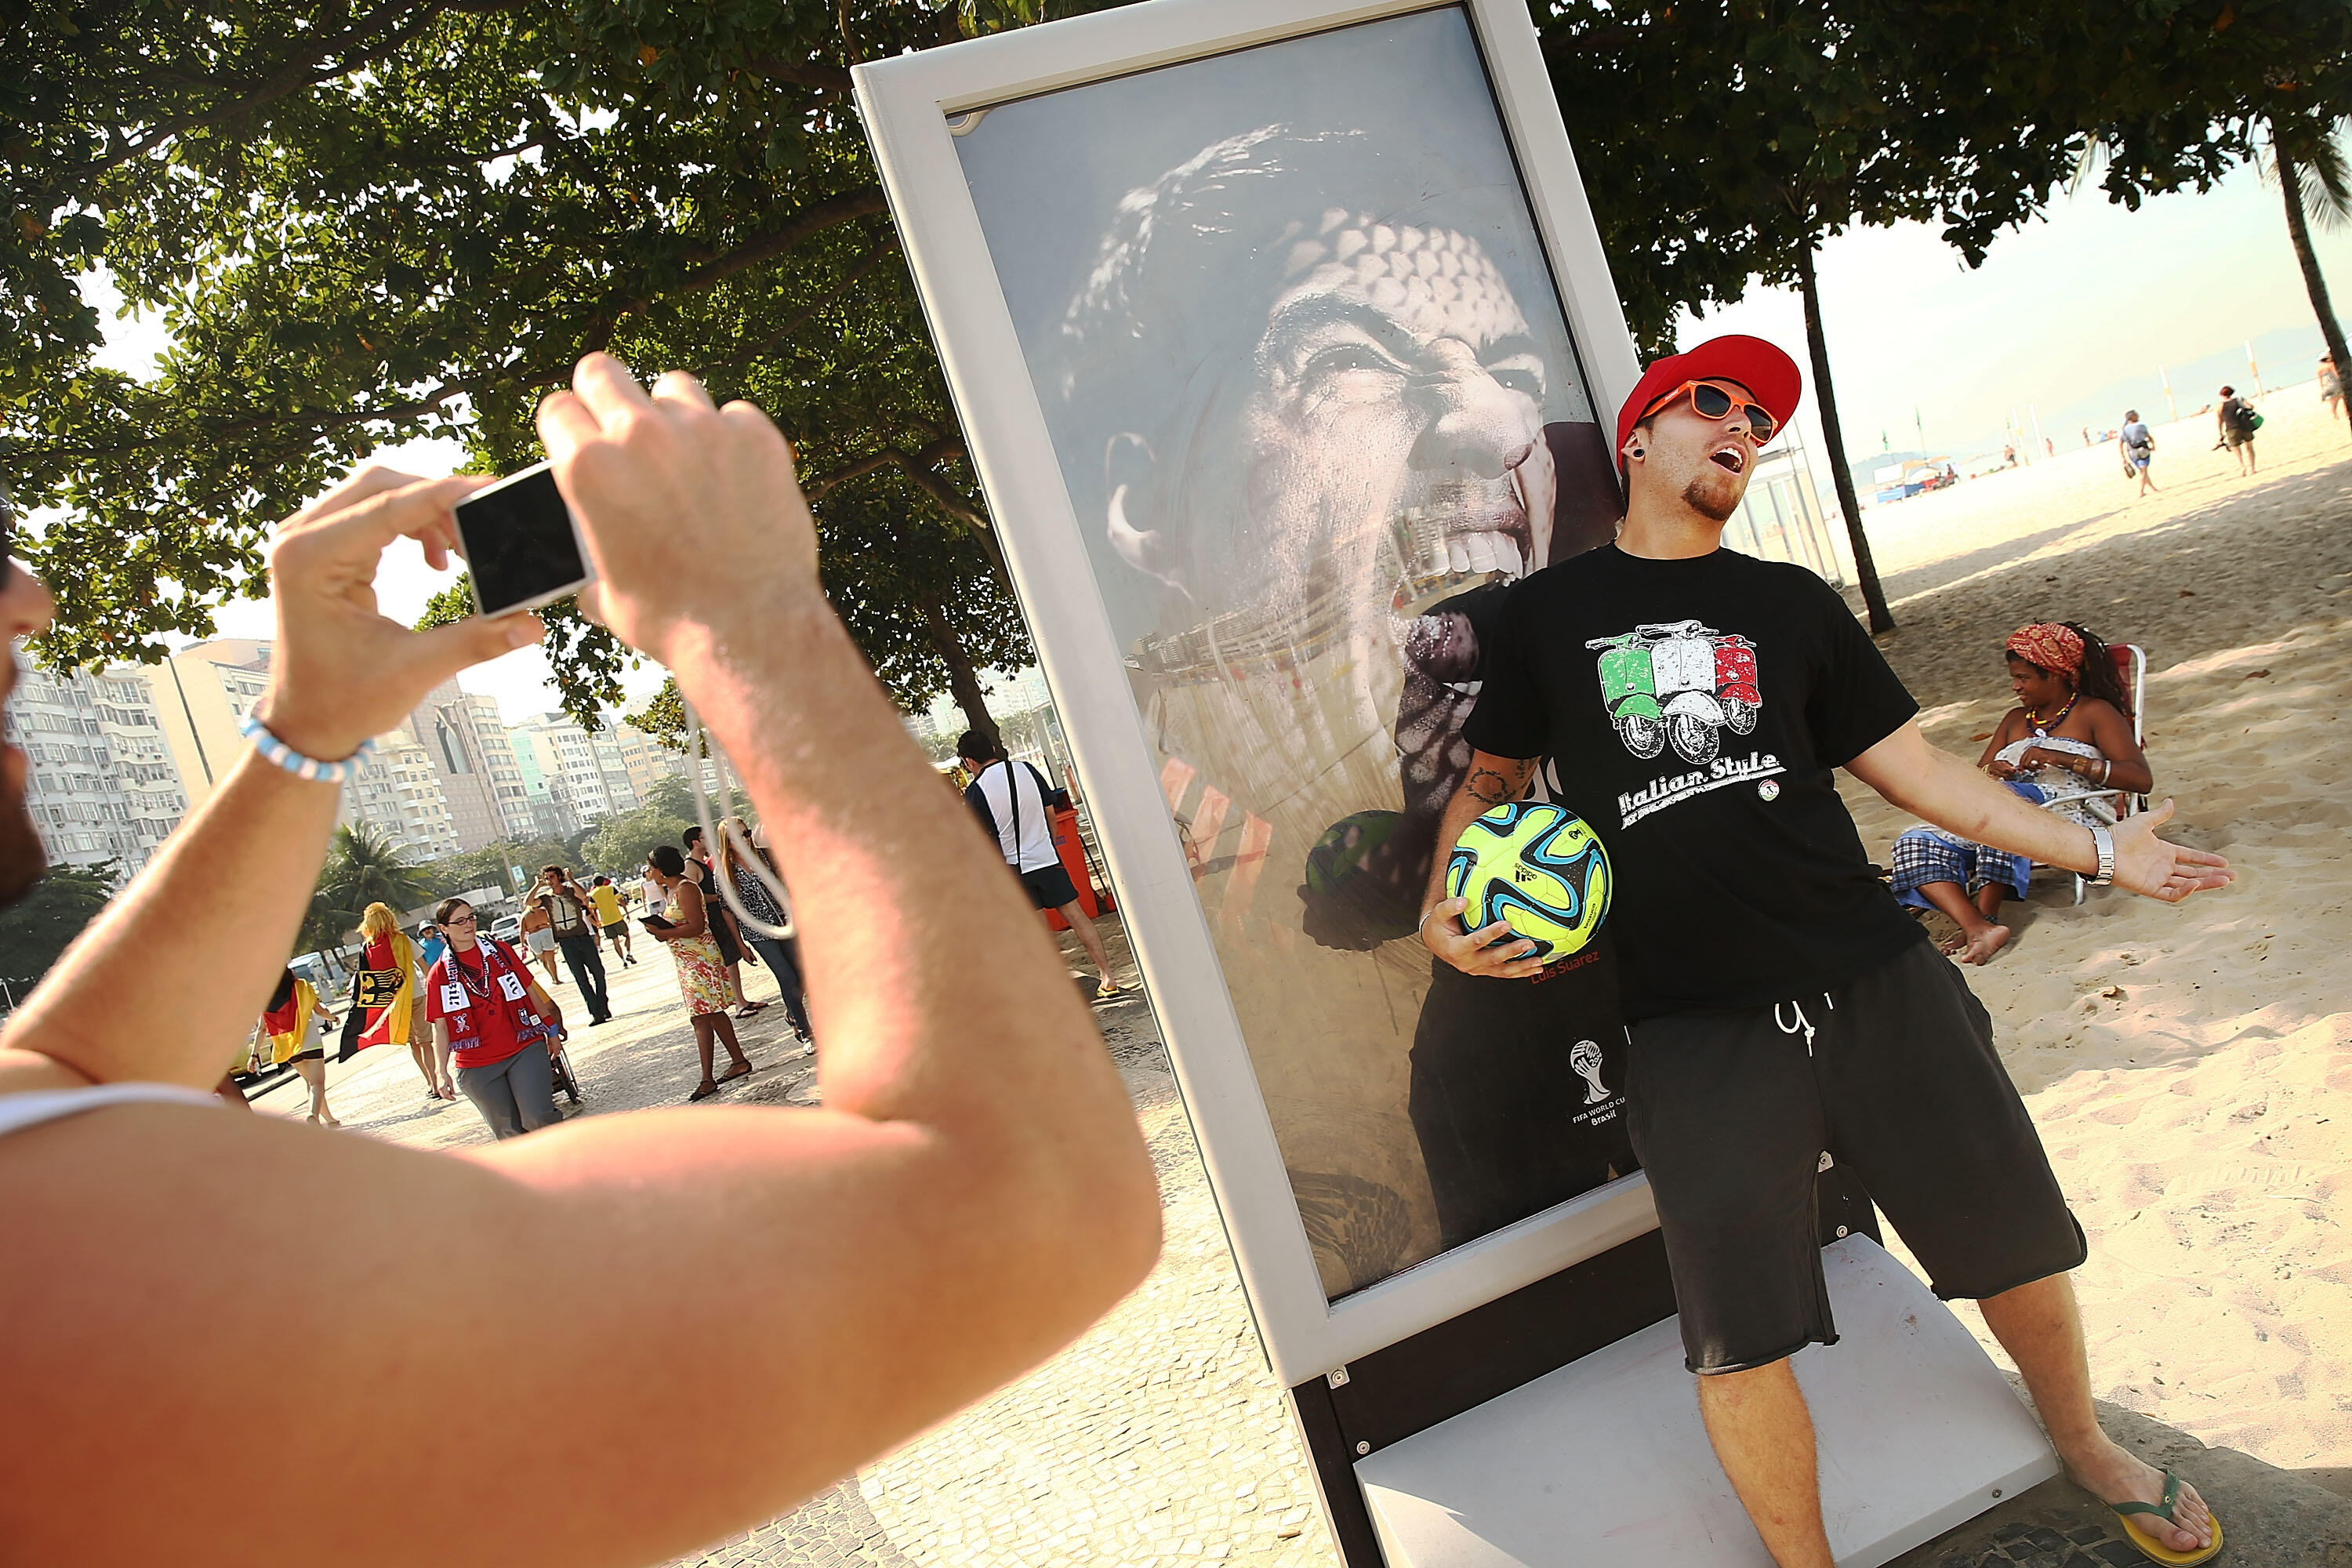 RIO DE JANEIRO, BRAZIL - JUNE 26:  A man taks a photo next to an advertisement featuring Uruguay's Luis Suarez, mocking the biting incident against opponent Giorgio Chiellini during the World Cup match against Italy, on Copacabana Beach on June 26, 2014 i